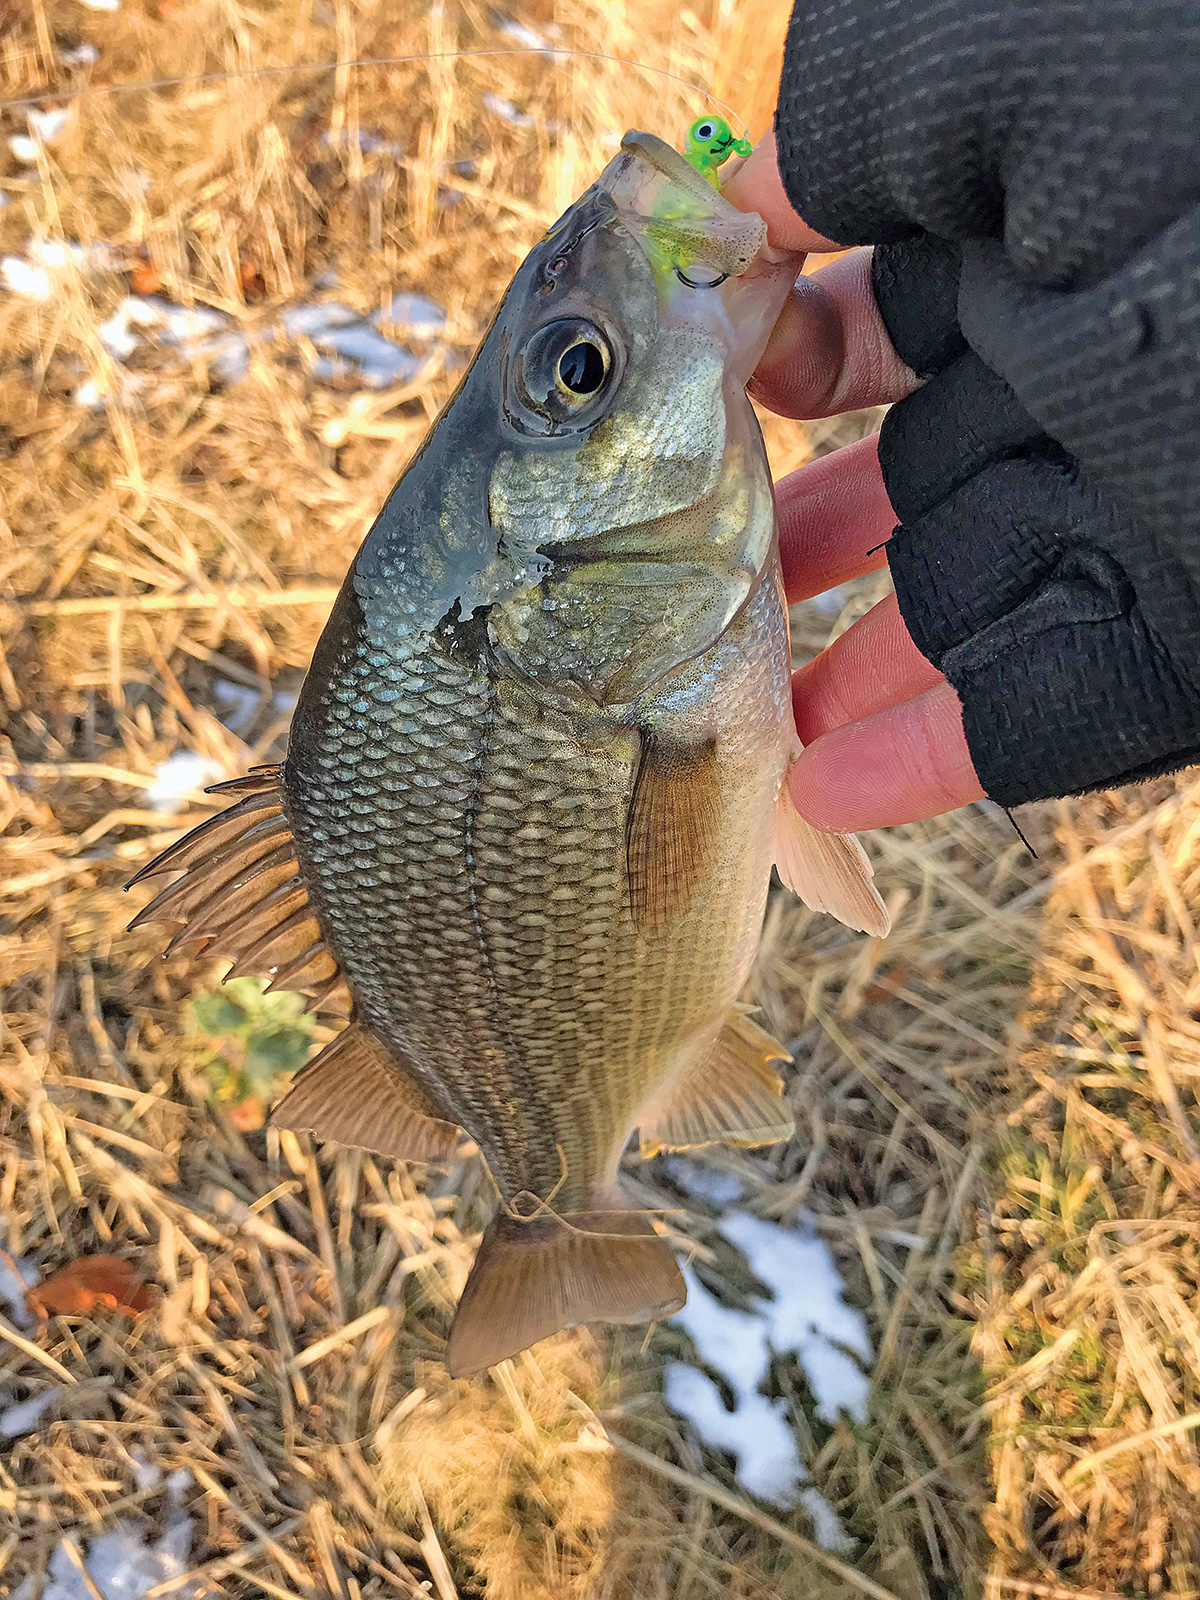 2018 2 Beating Cabin Fever Fish